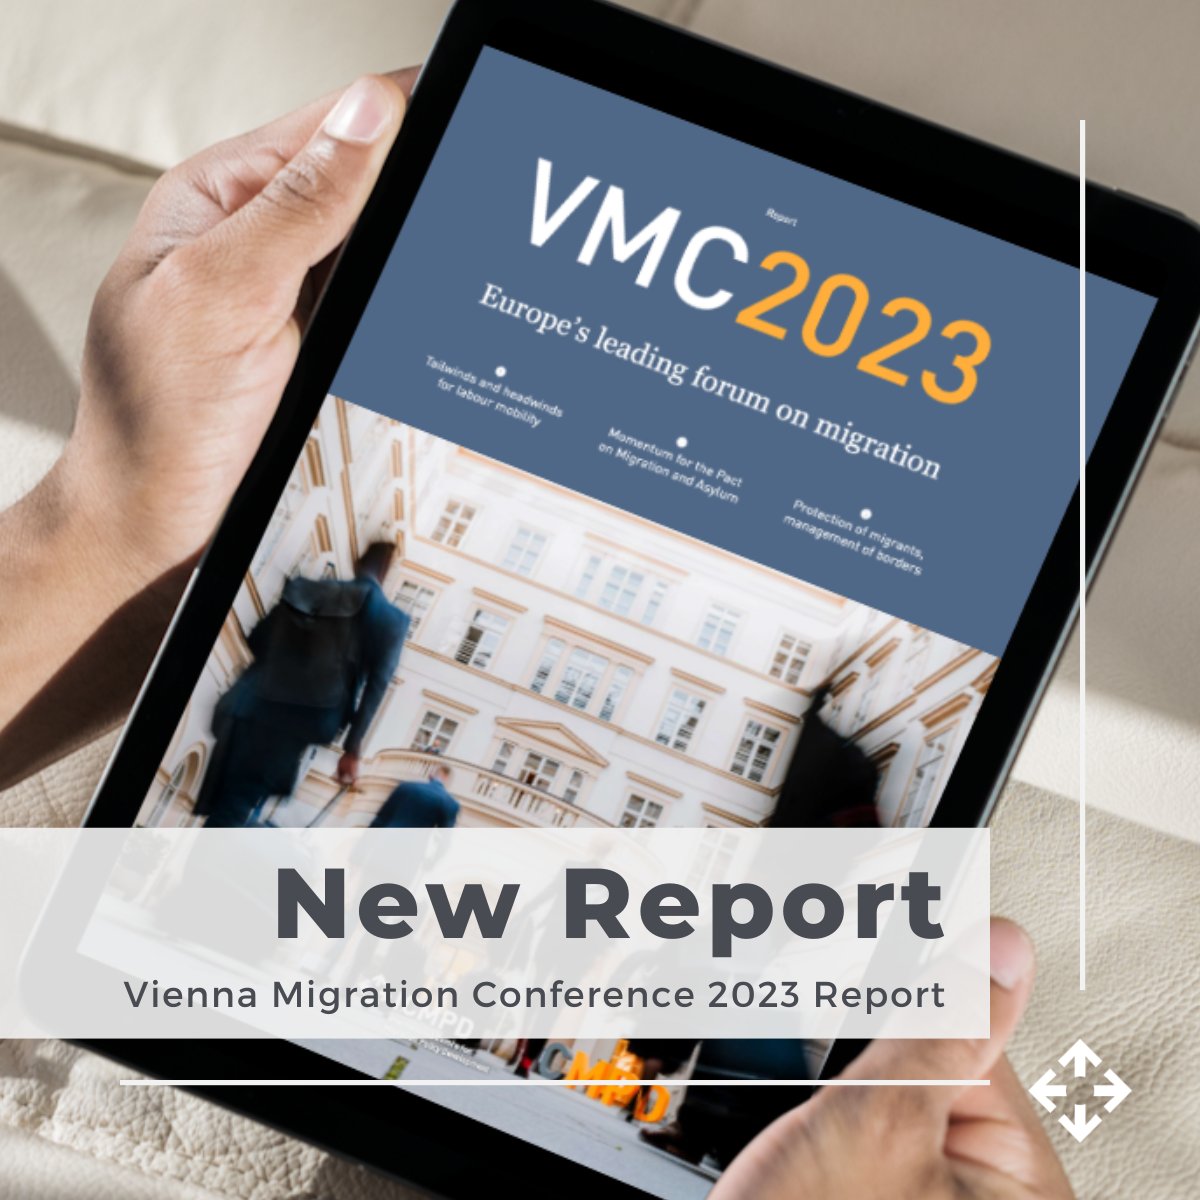 The VMC2023 report is out now. Discover key insights on migration’s most pressing challenges from the 8th edition of #ViennaMigConf. Includes expert commentaries on migration cooperation, attracting global talent, and the benefits of nearshoring: icmpd.org/file/download/……